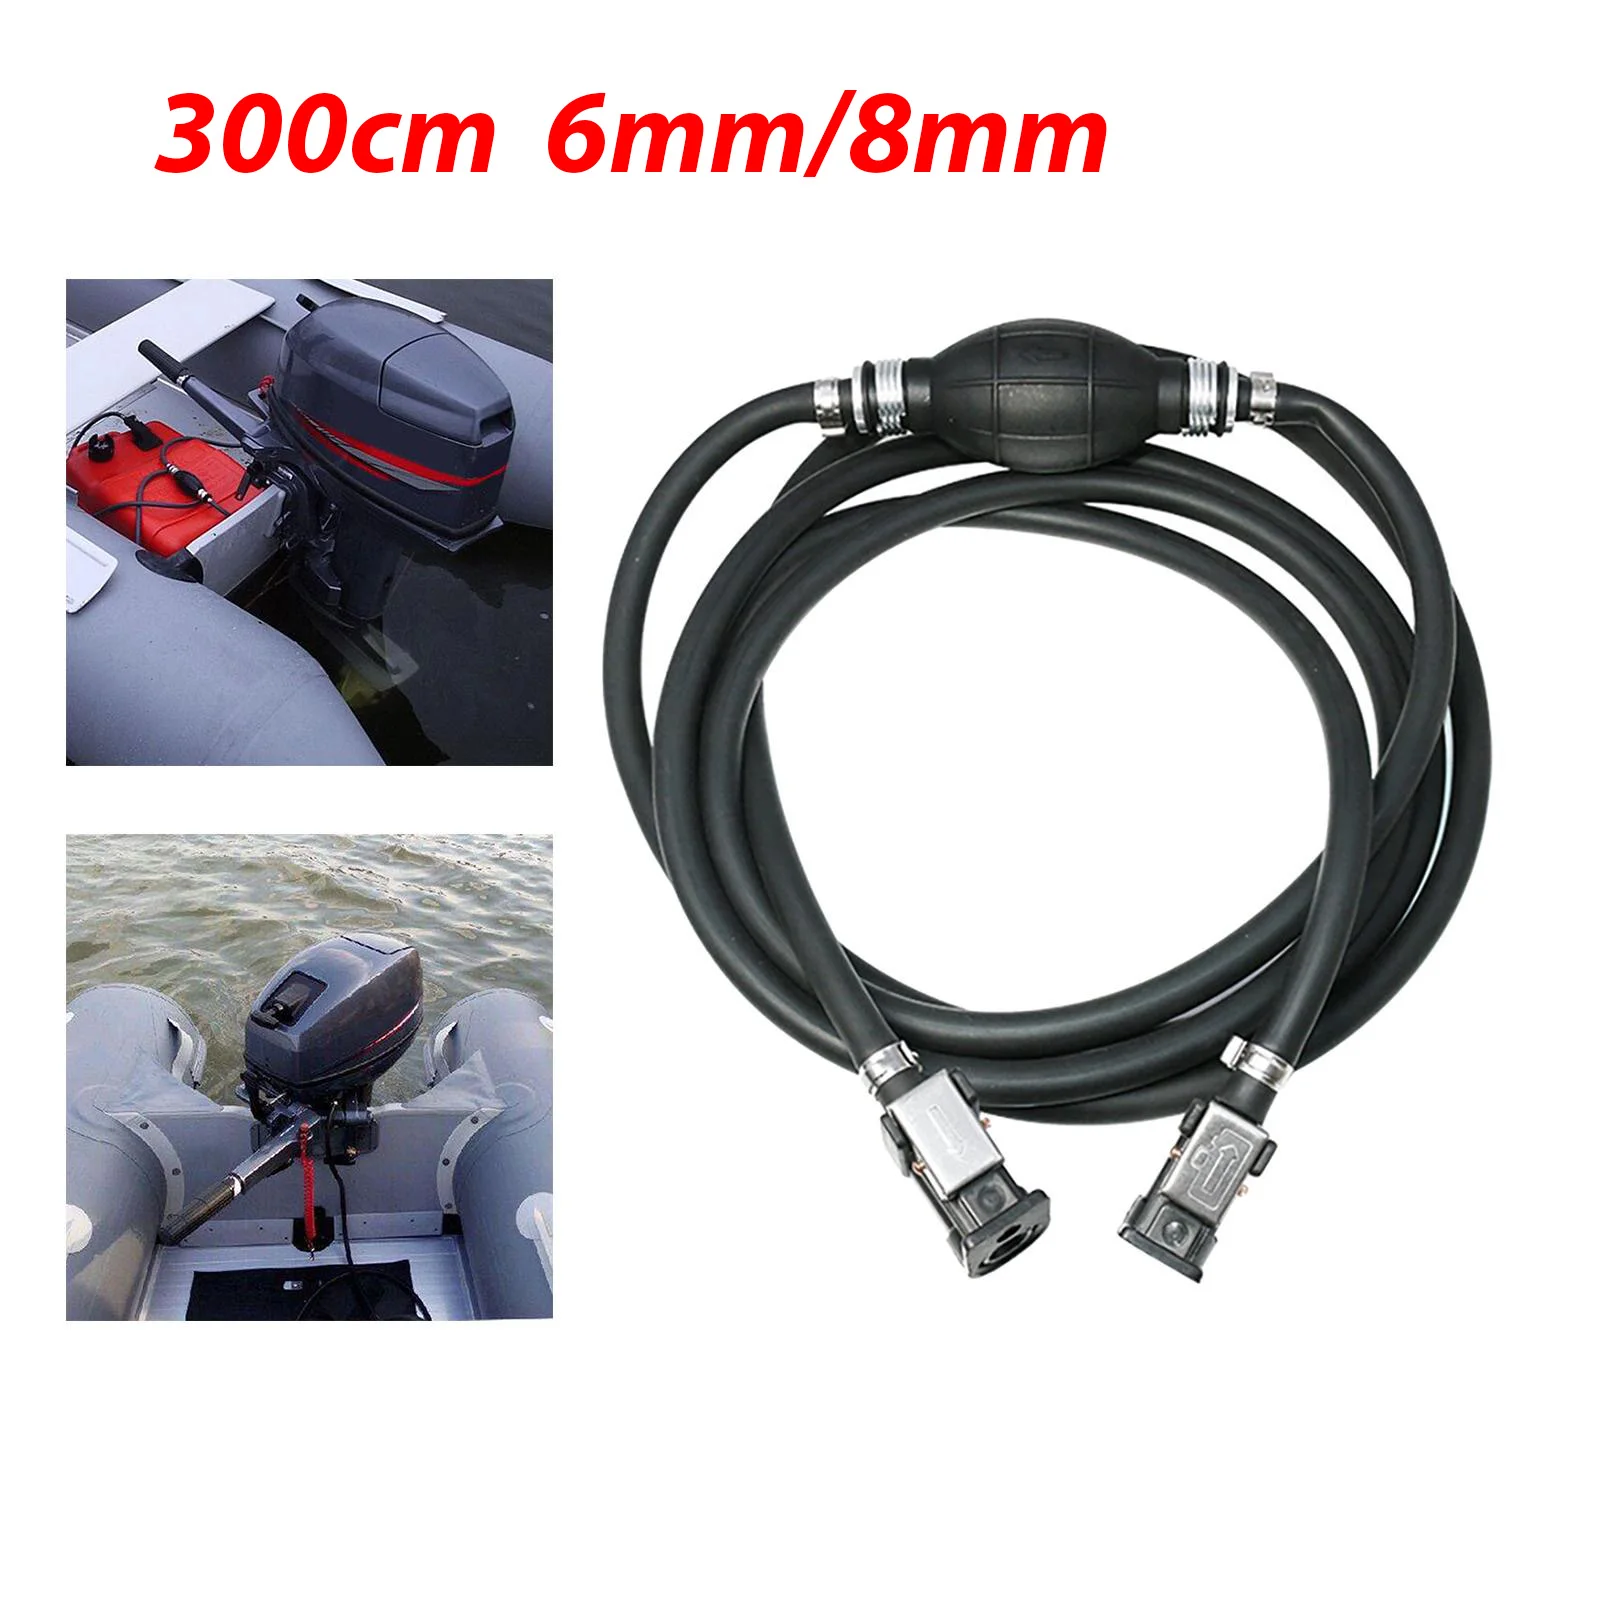 

6mm/8mm Boat Outboard Fuel Line Hose Petrol Fuel Tank Pipe Fitting Connector Kit For Yamaha Outboard Engine Motor